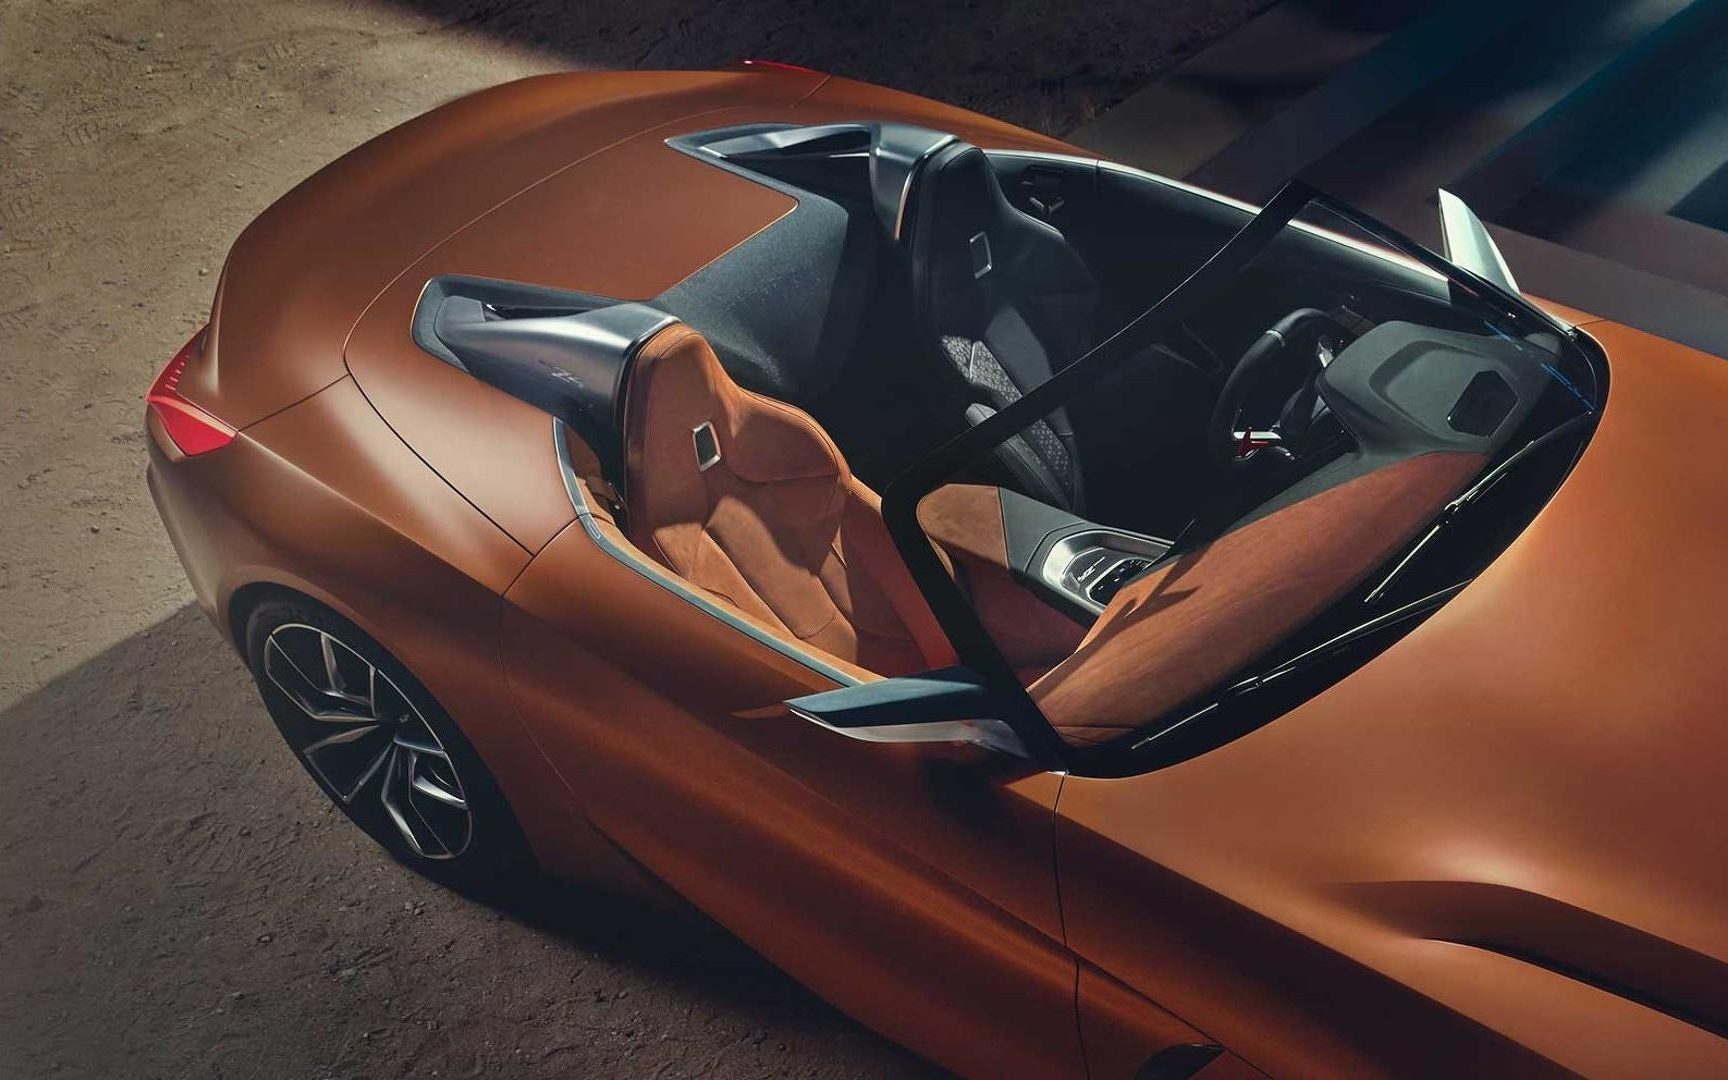 bmw-z4-concept-official-pics-leaked-23-e1502962853750.jpg